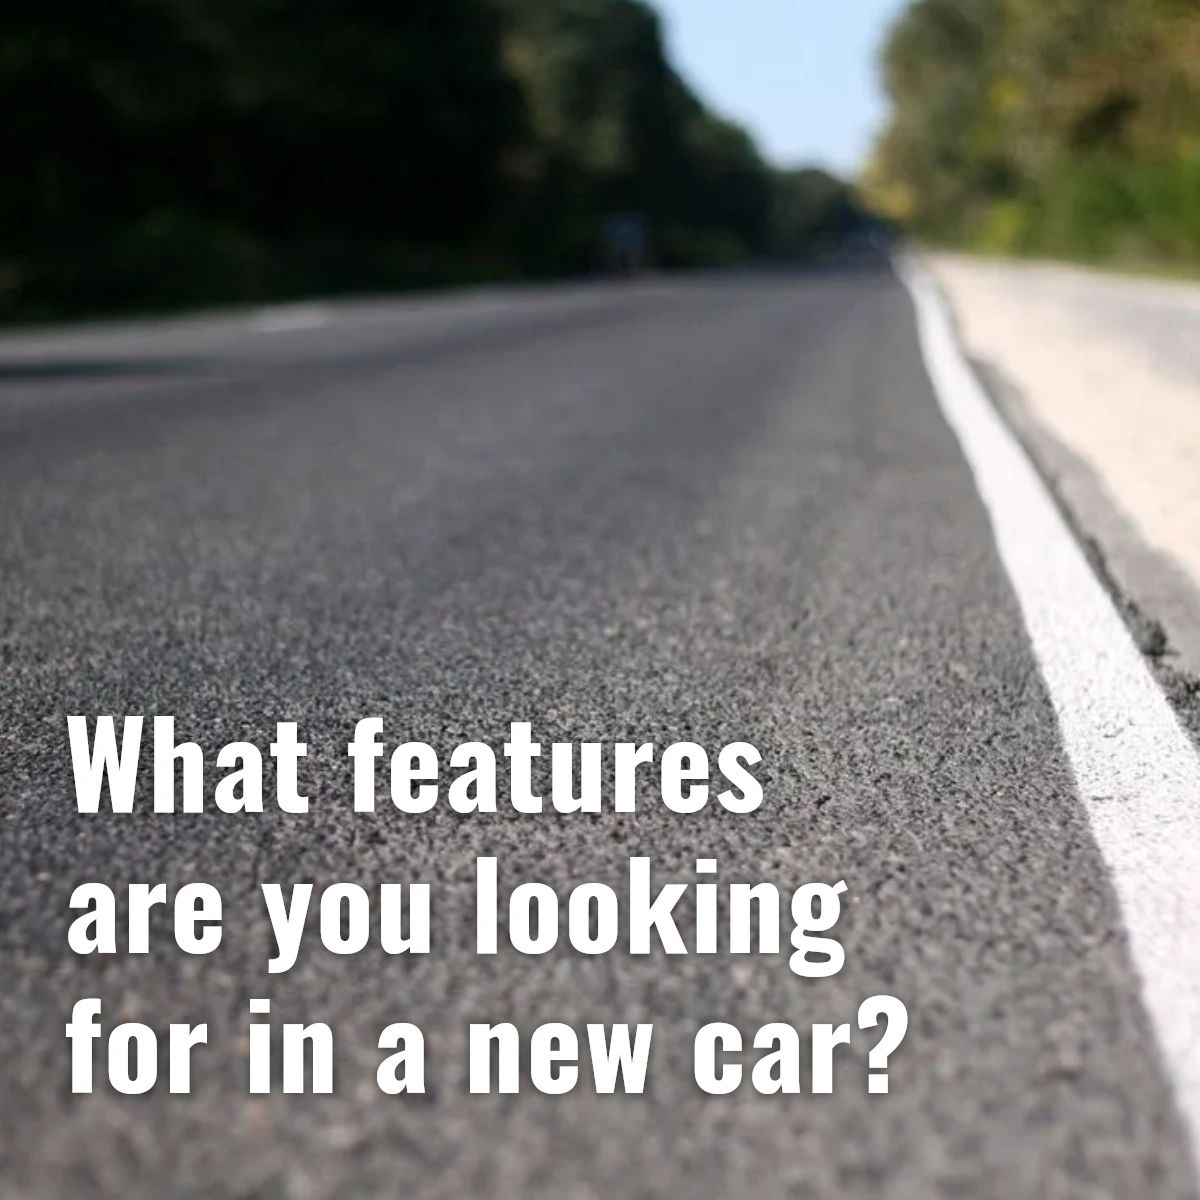 From the highest-quality backup camera to the vehicle with the best gas mileage, there are a lot of features that make each car unique. What items are top priority for you in your car search? #AdvancedAutoSales #DracutMA #DracutAuto #CarDealership